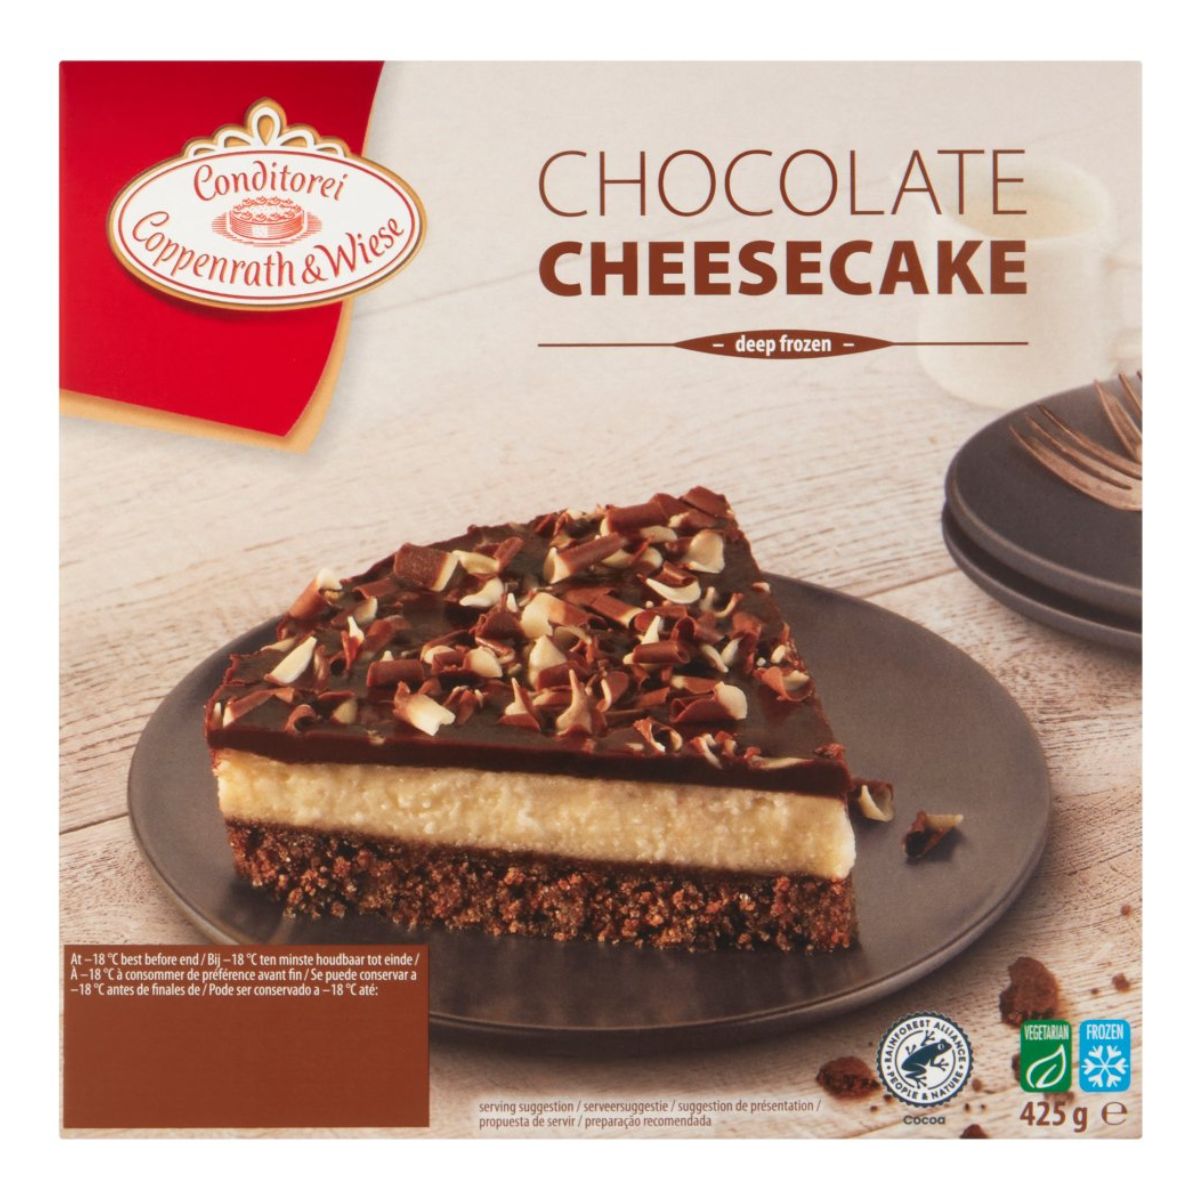 A Conditorei Coppenrath & Wiese - Chocolate Cheesecake - 425g on a plate.